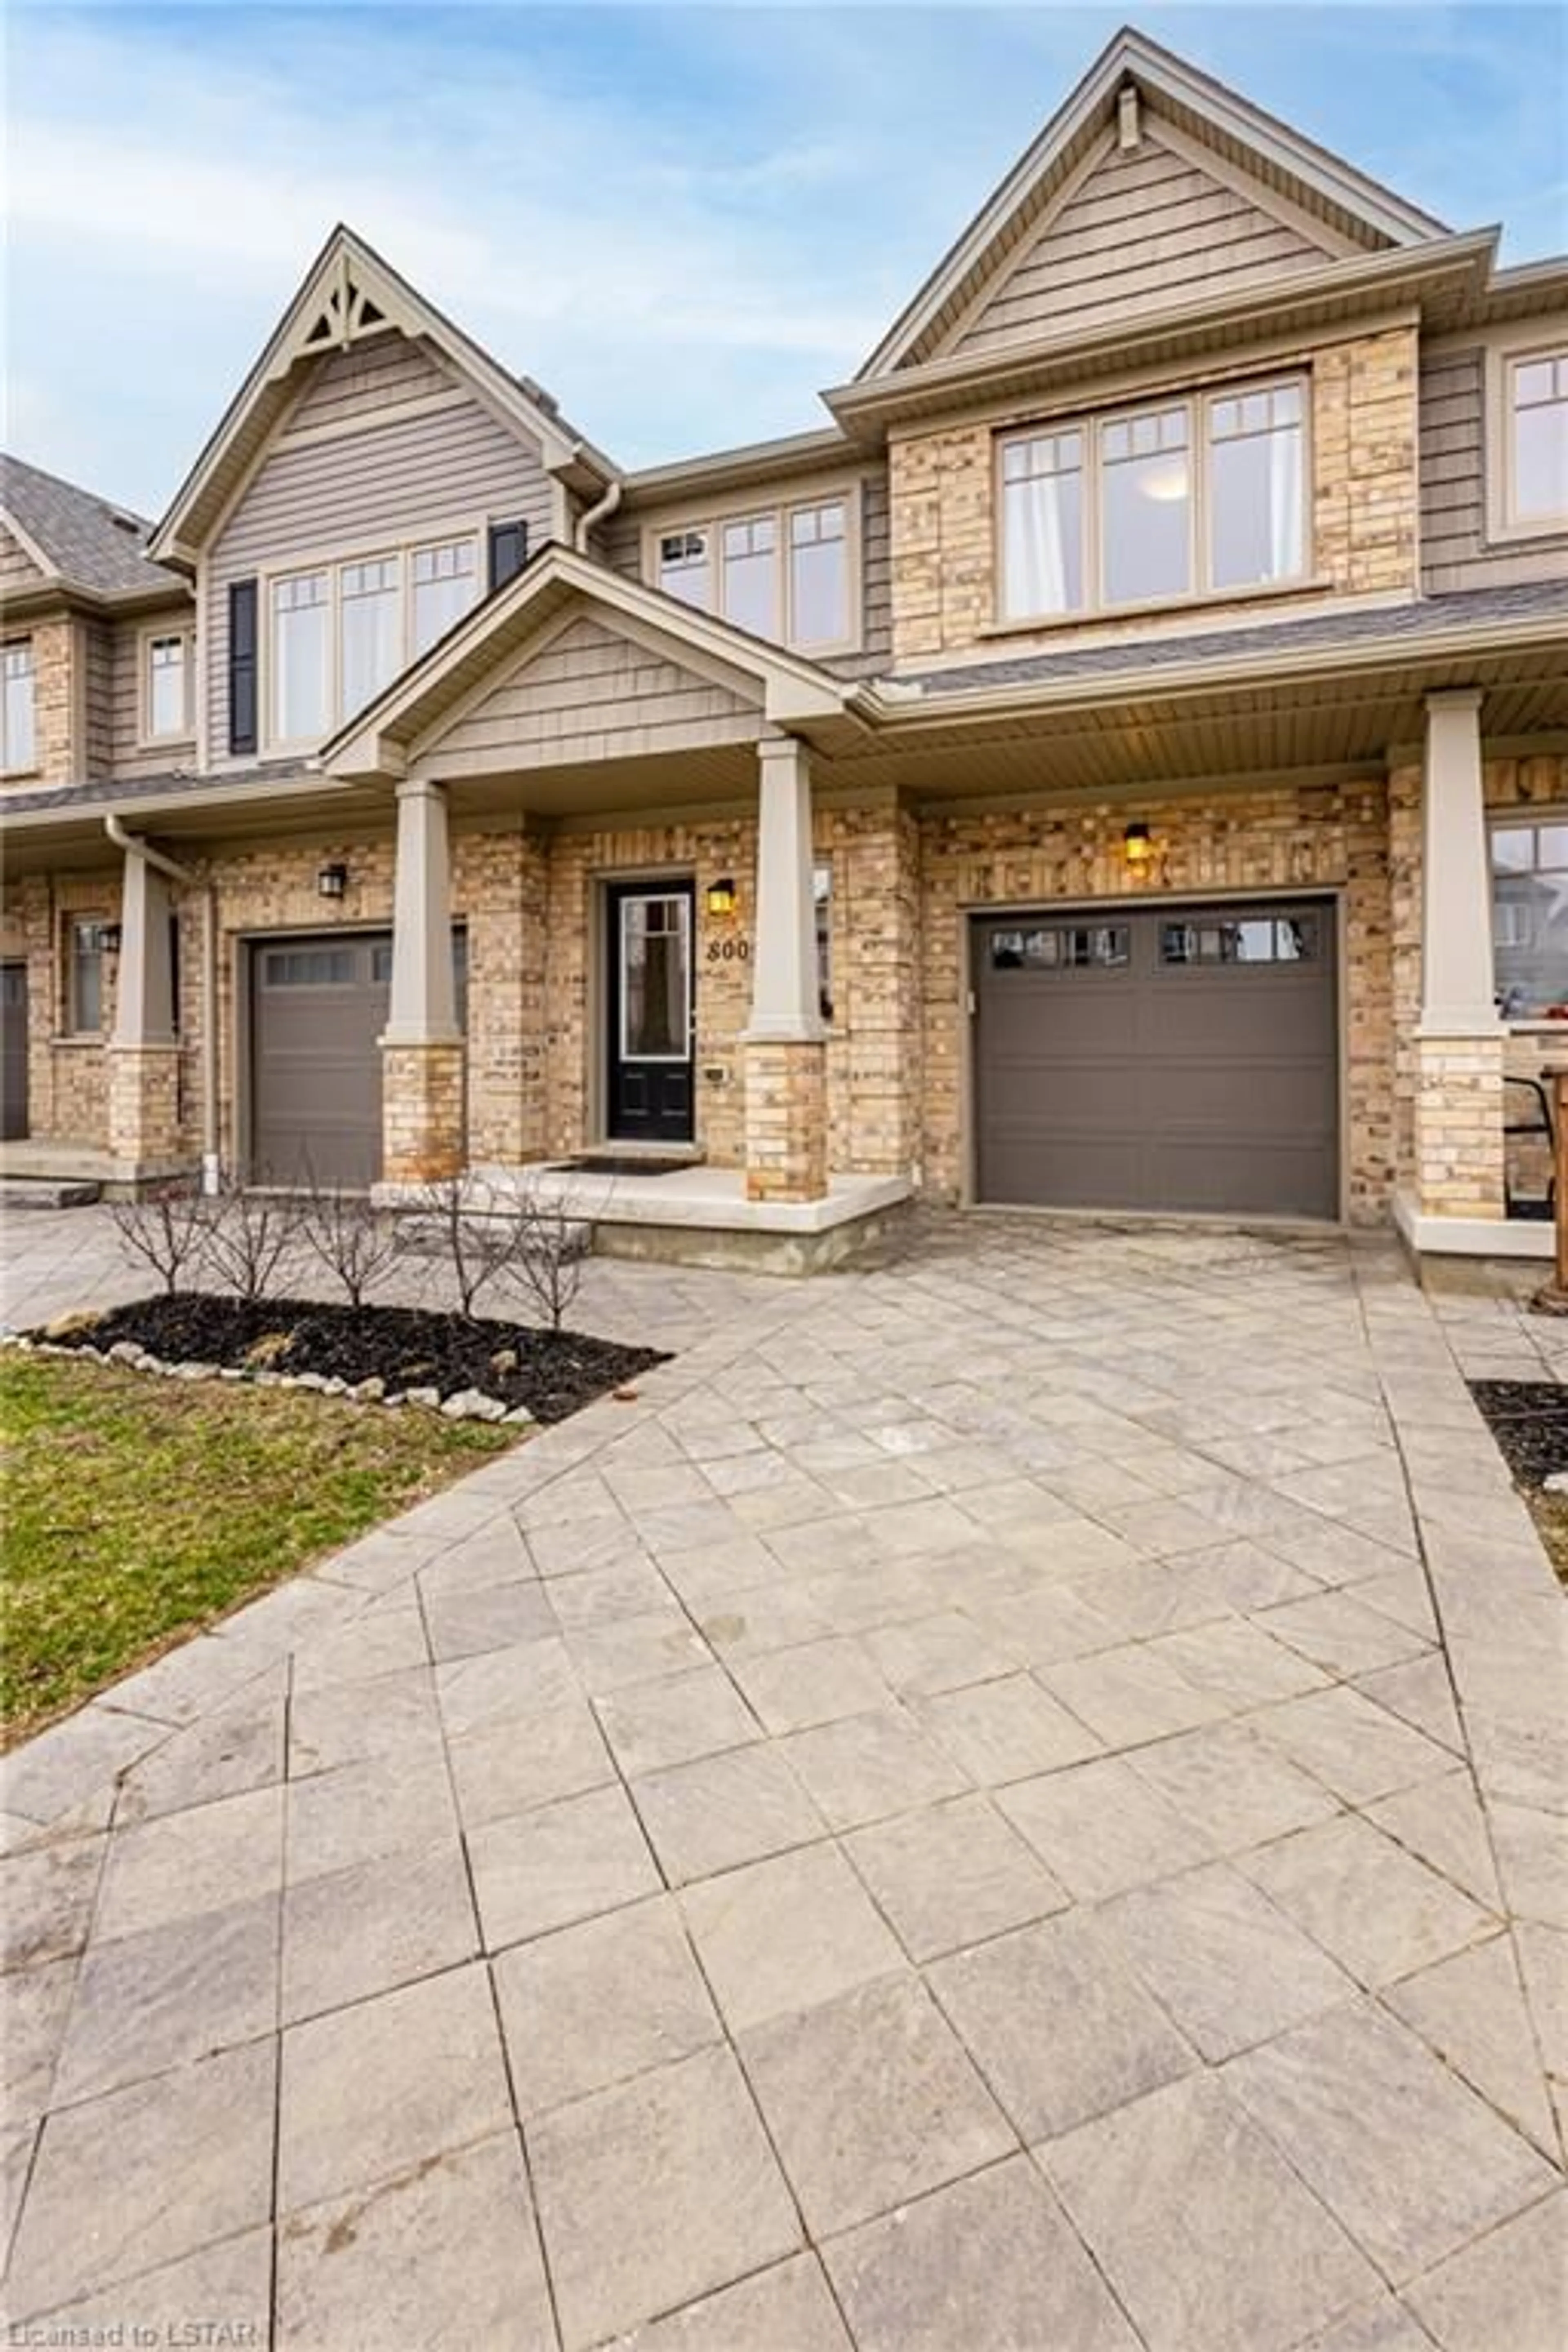 Home with brick exterior material for 800 Cedarpark Way, London Ontario N5X 0C3